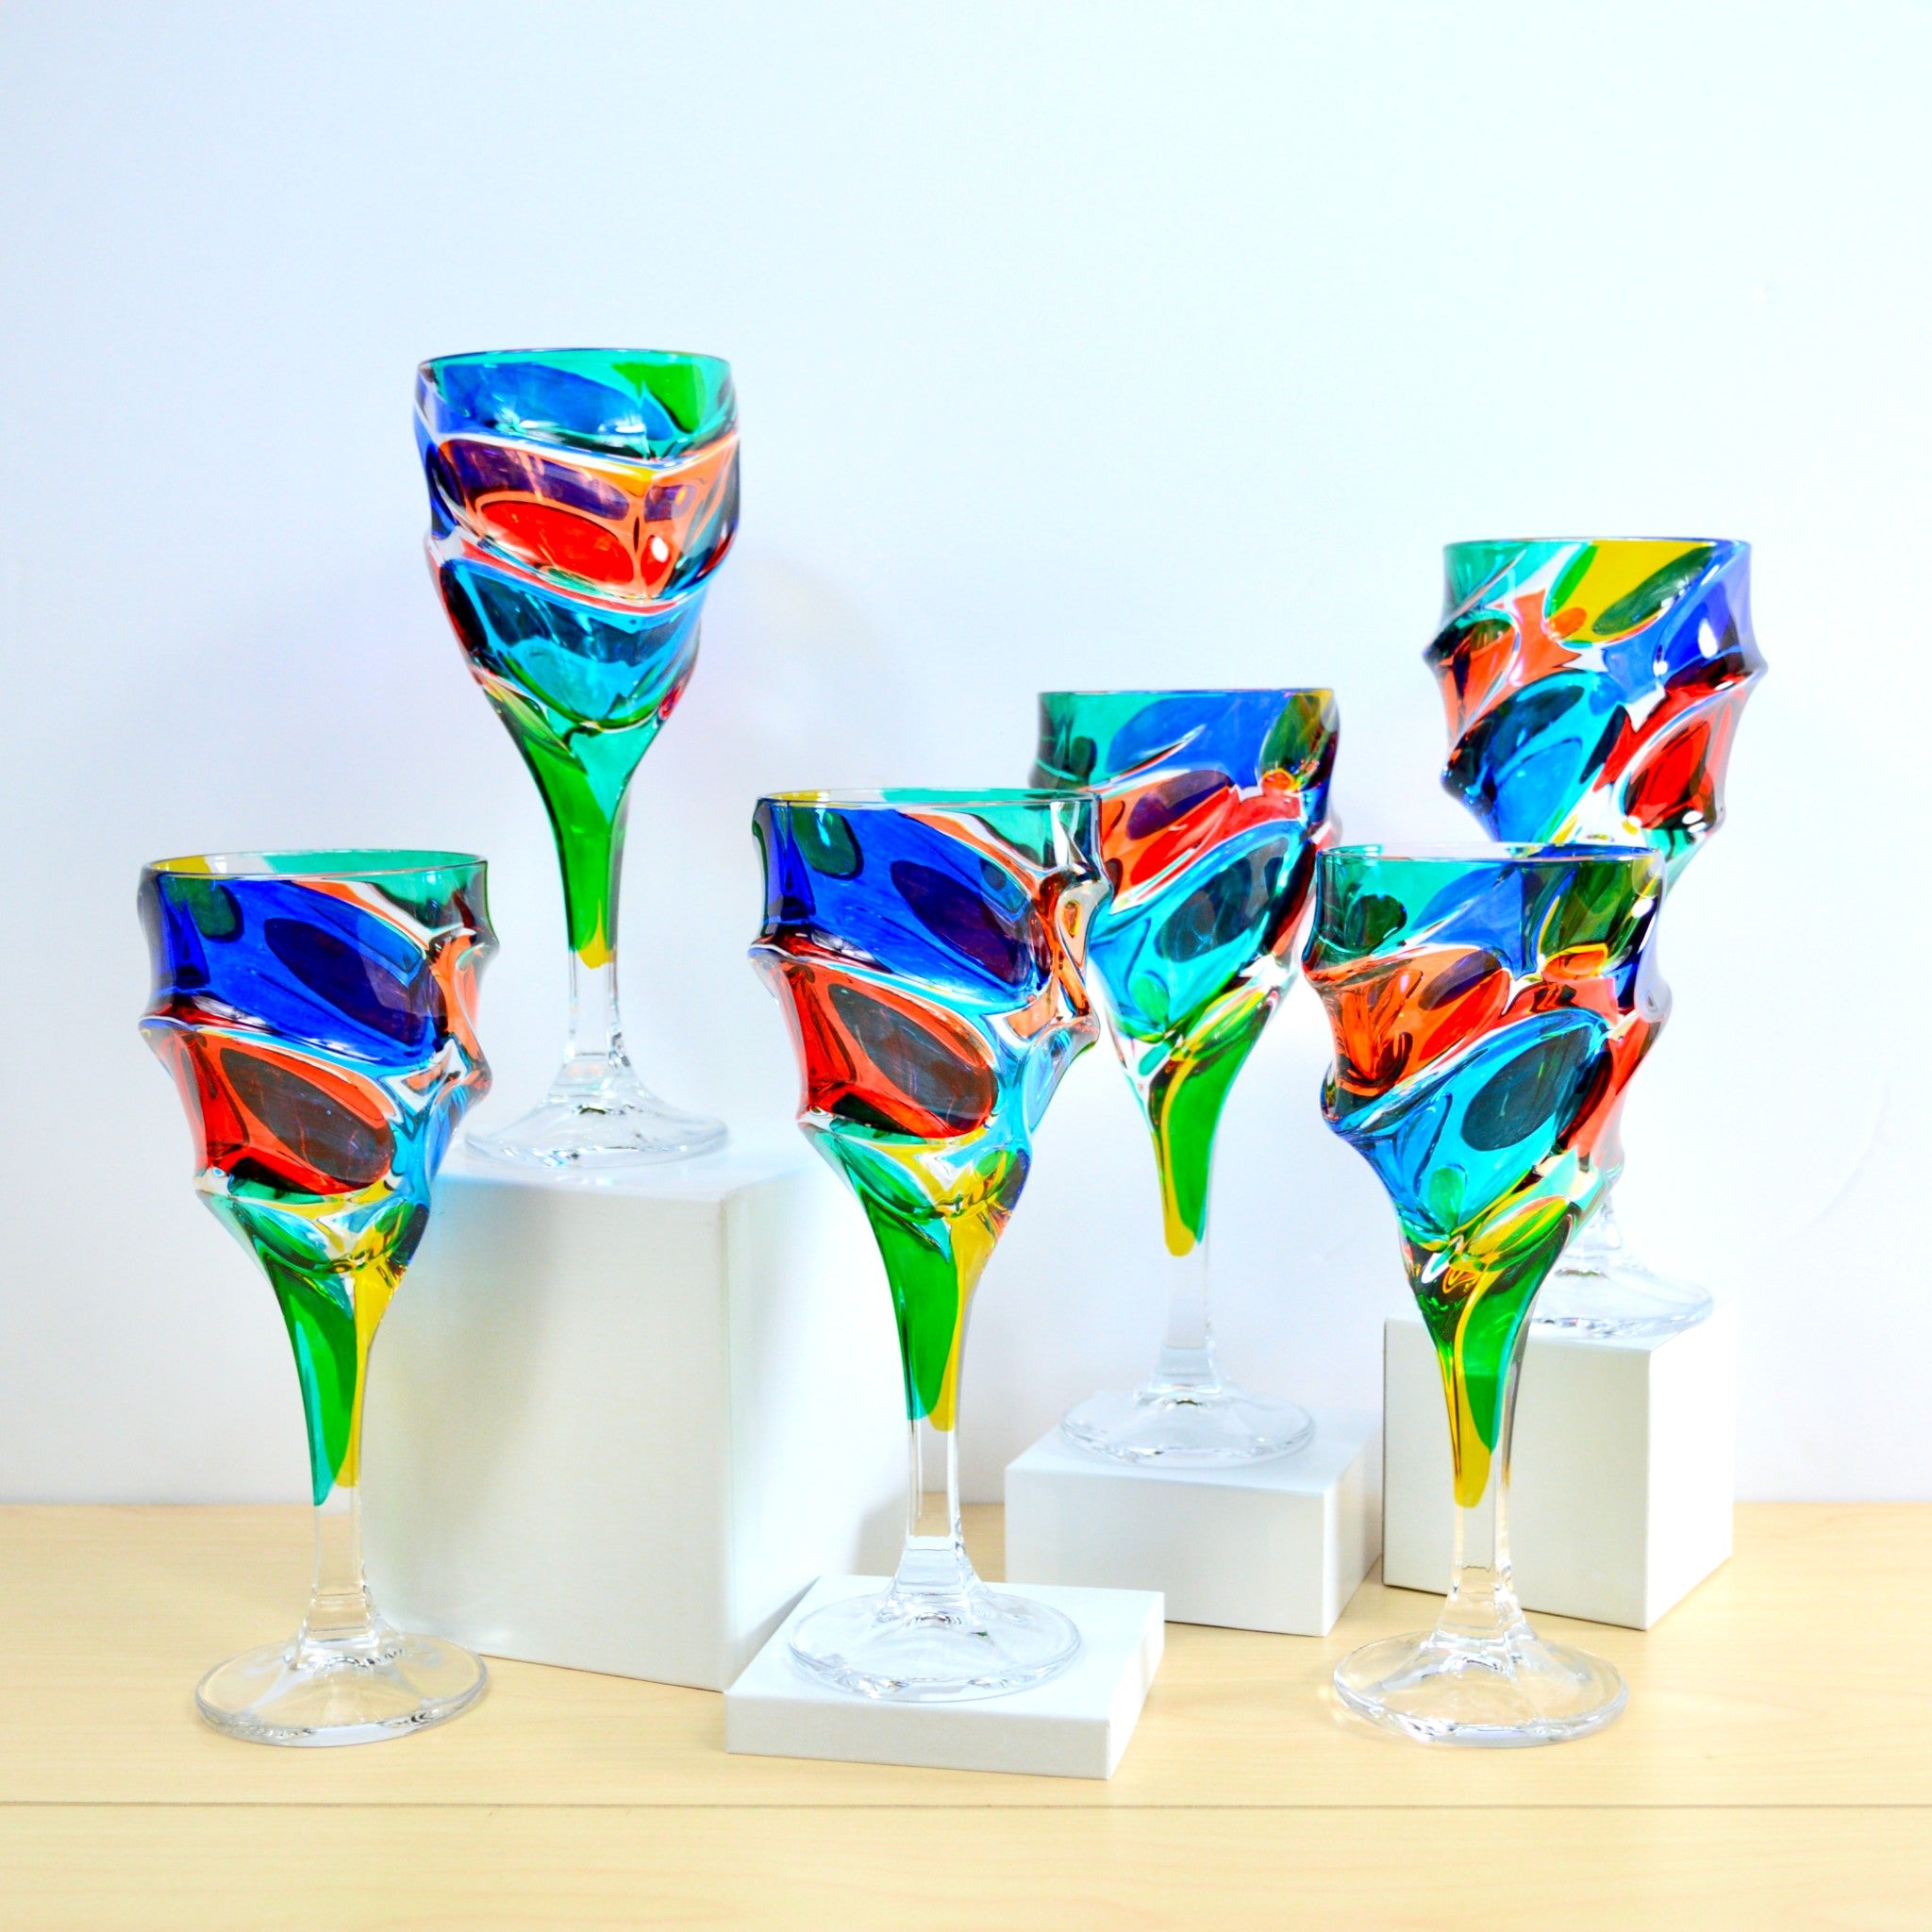 1 Party Cup Hand Blown Glass Cup, Cane, Murrine, Colorful, Playful, Set of  Glasses, Wine Glass, Great Gift Idea, Unique, Price per Glass 